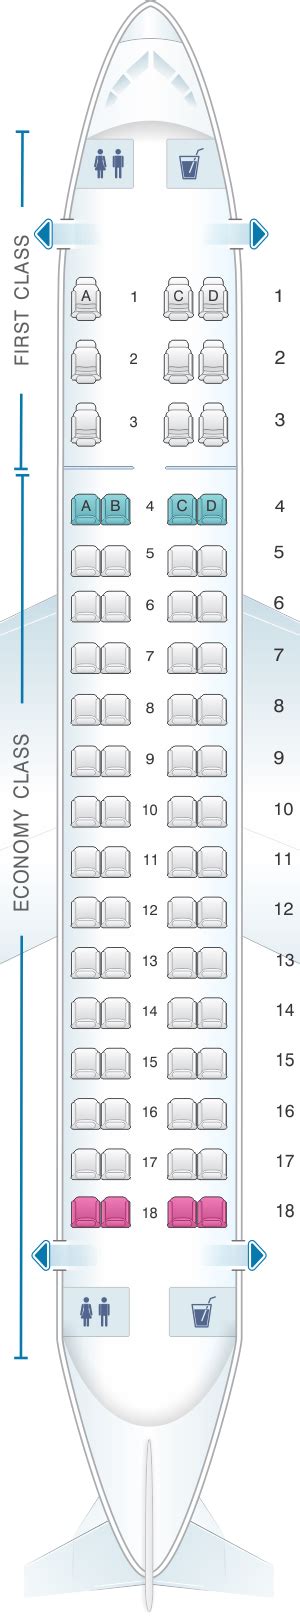 Embraer 170 seating american airlines. Advertiser Disclosure: Many of the credit card offers and links that appear on the website are from credit card companies or websites from which Seatlink.com receives compensation 